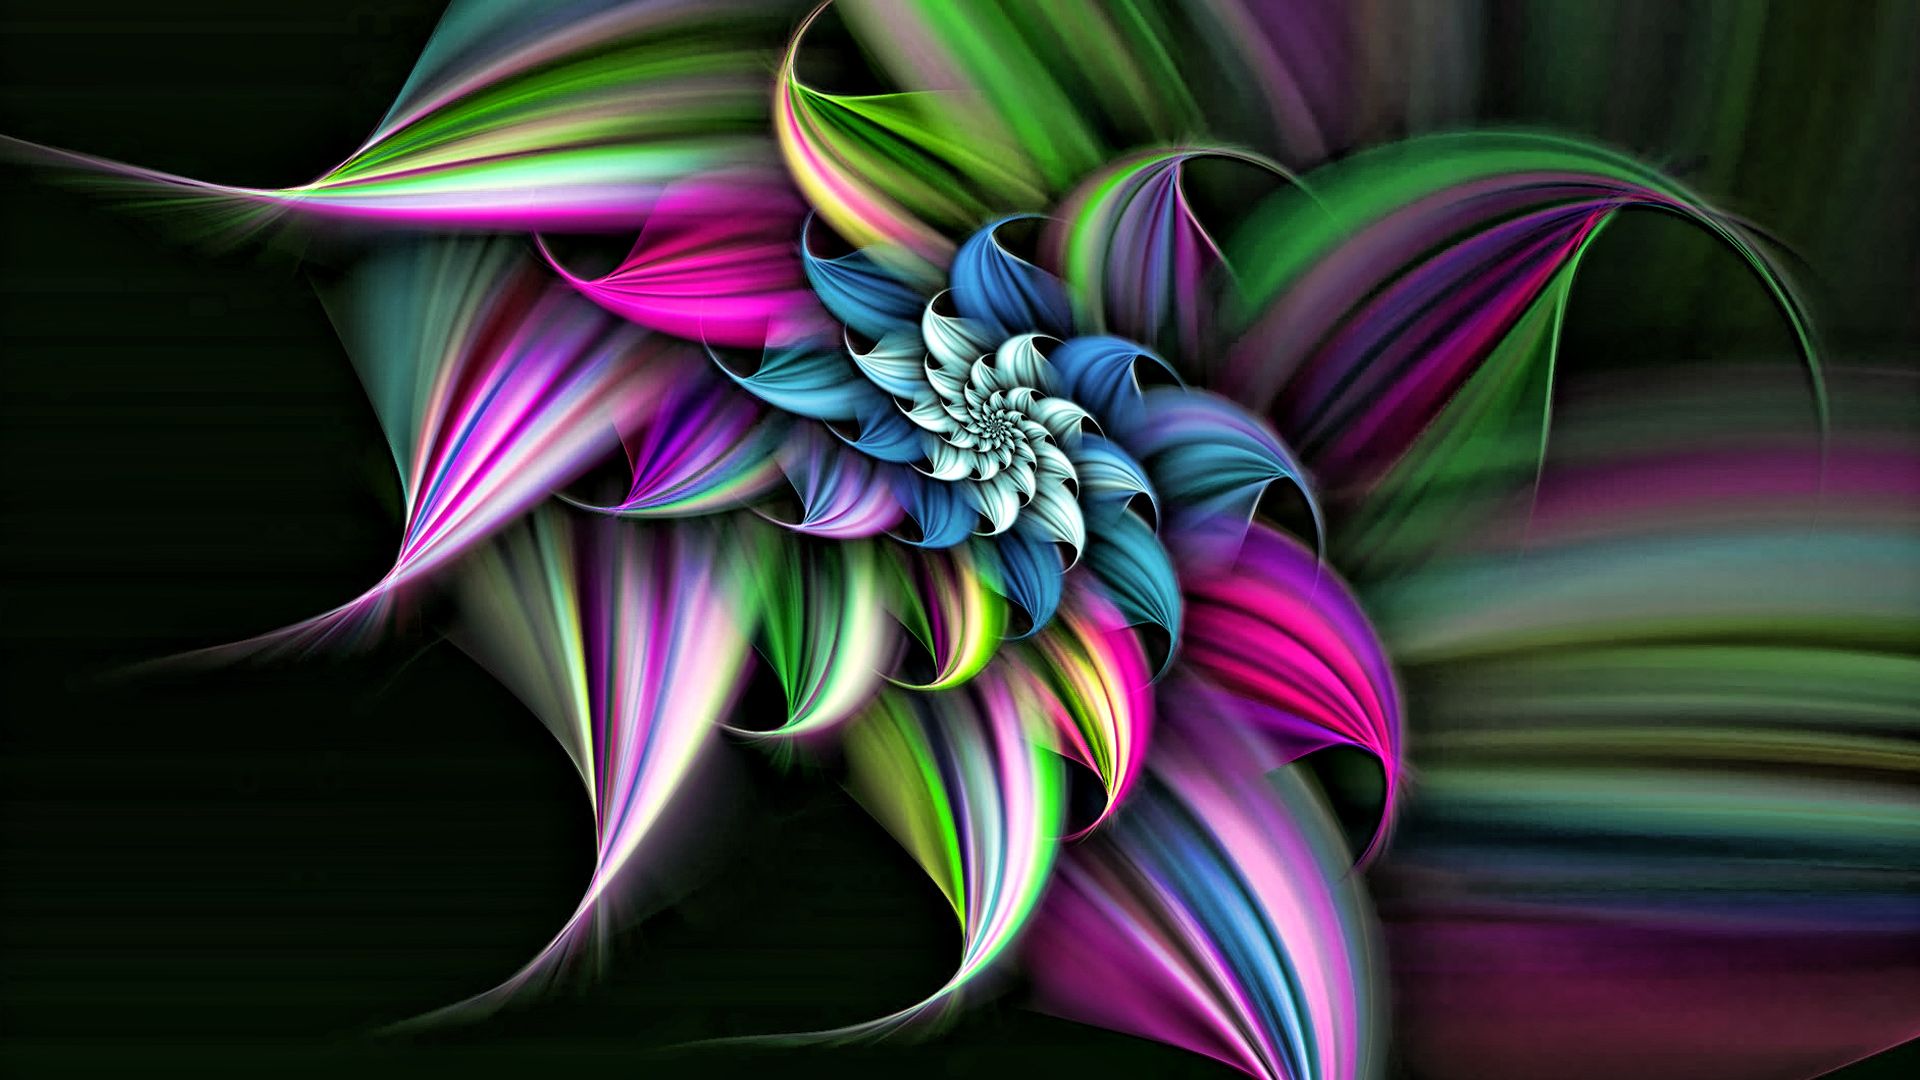 Cool Wallpaper 3d 1080p Abstract In